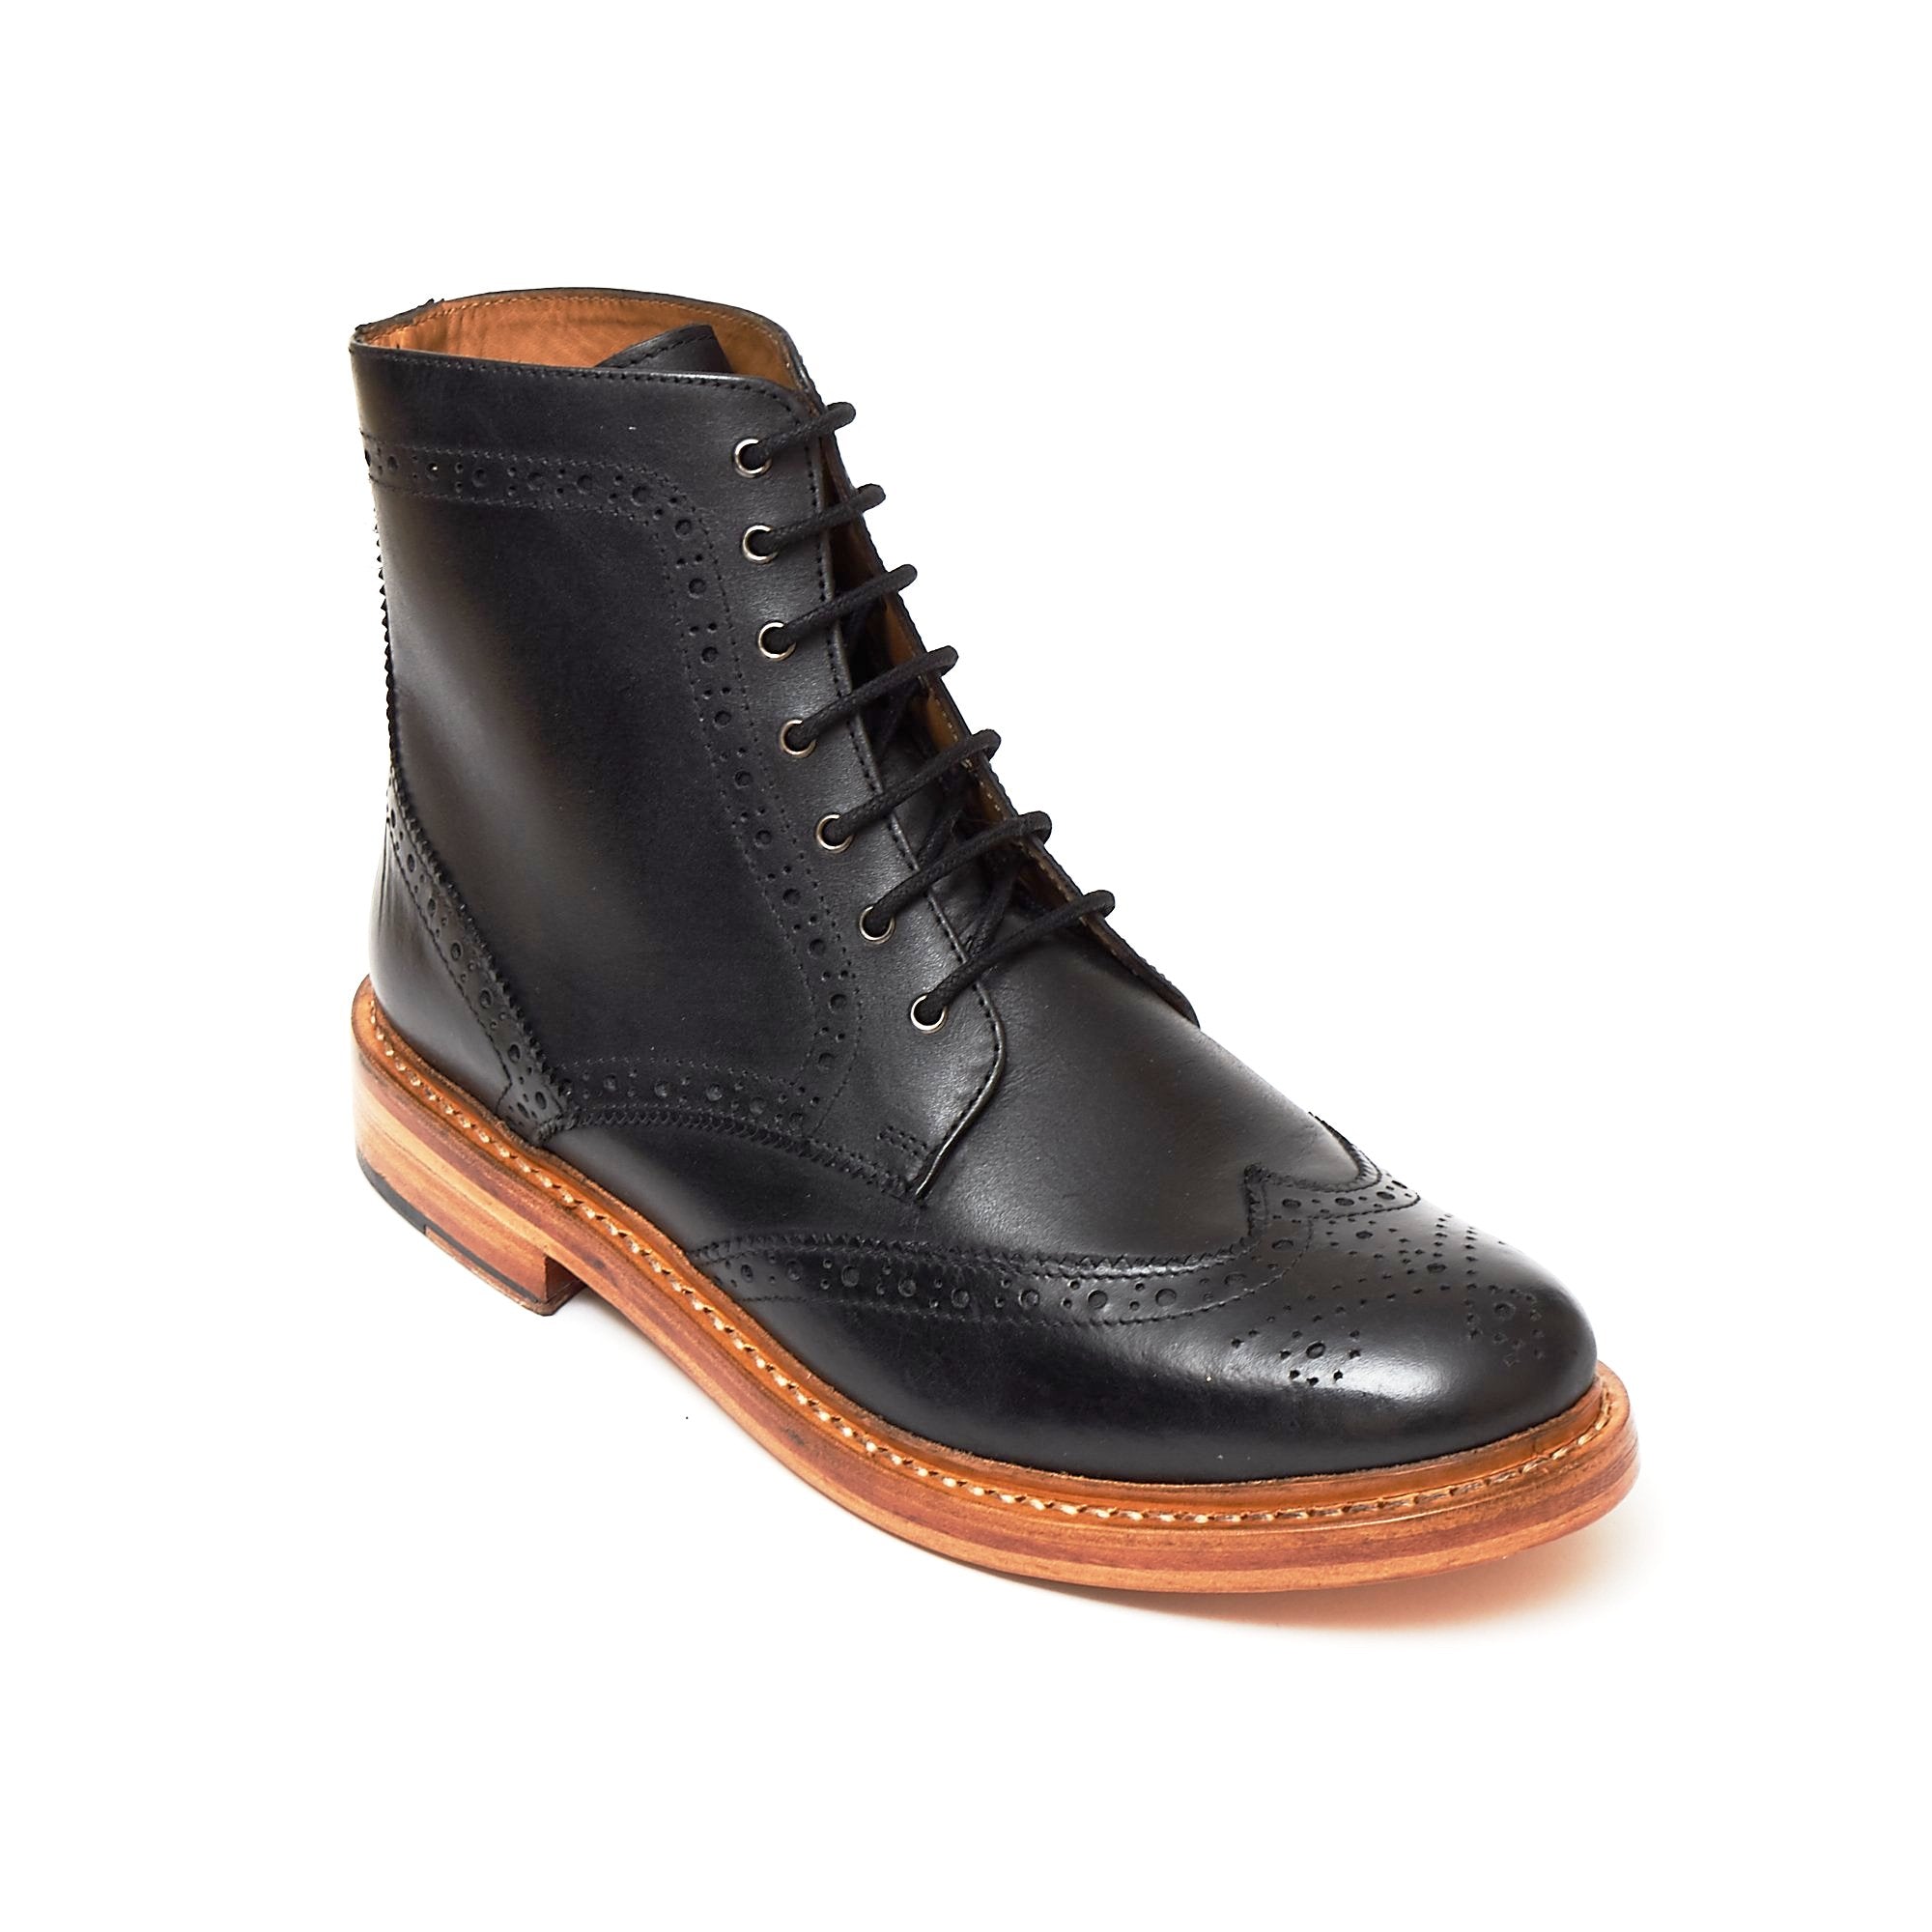 Mens Leather Goodyear Welted Lace Up Boots - 17939 Black